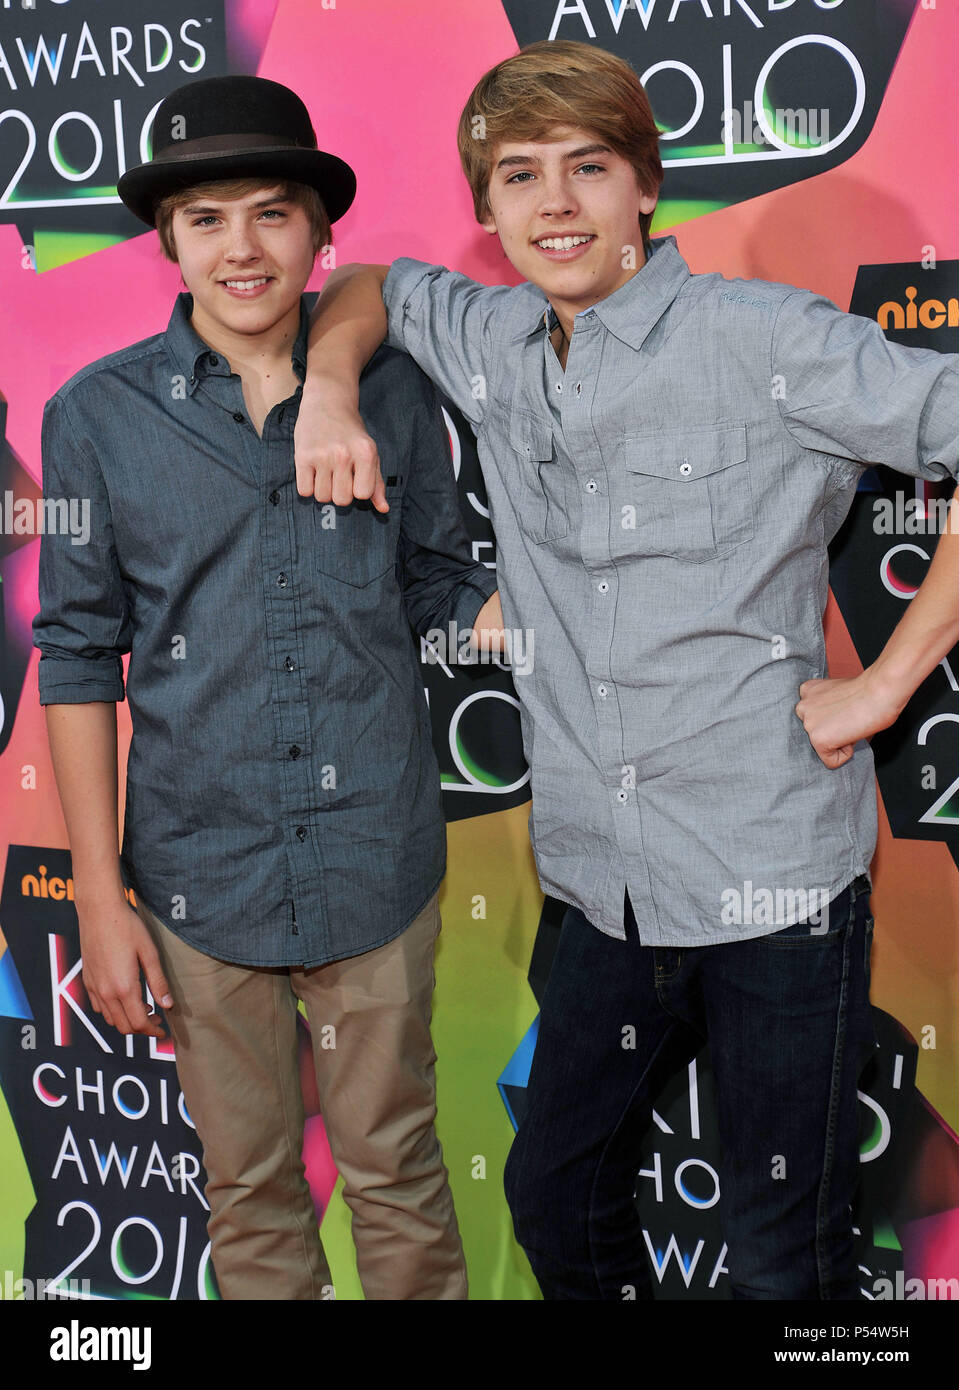 Cole Sprouse   Dylan Sprouse  42   - 23th  Annual Kids Choice Awards at The UCLA Pauley Pavillion In Los Angeles.Cole Sprouse   Dylan Sprouse  42  Event in Hollywood Life - California, Red Carpet Event, USA, Film Industry, Celebrities, Photography, Bestof, Arts Culture and Entertainment, Celebrities fashion, Best of, Hollywood Life, Event in Hollywood Life - California, Red Carpet and backstage, Music celebrities, Topix, Couple, family ( husband and wife ) and kids- Children, brothers and sisters inquiry tsuni@Gamma-USA.com, Credit Tsuni / USA, 2010 Stock Photo